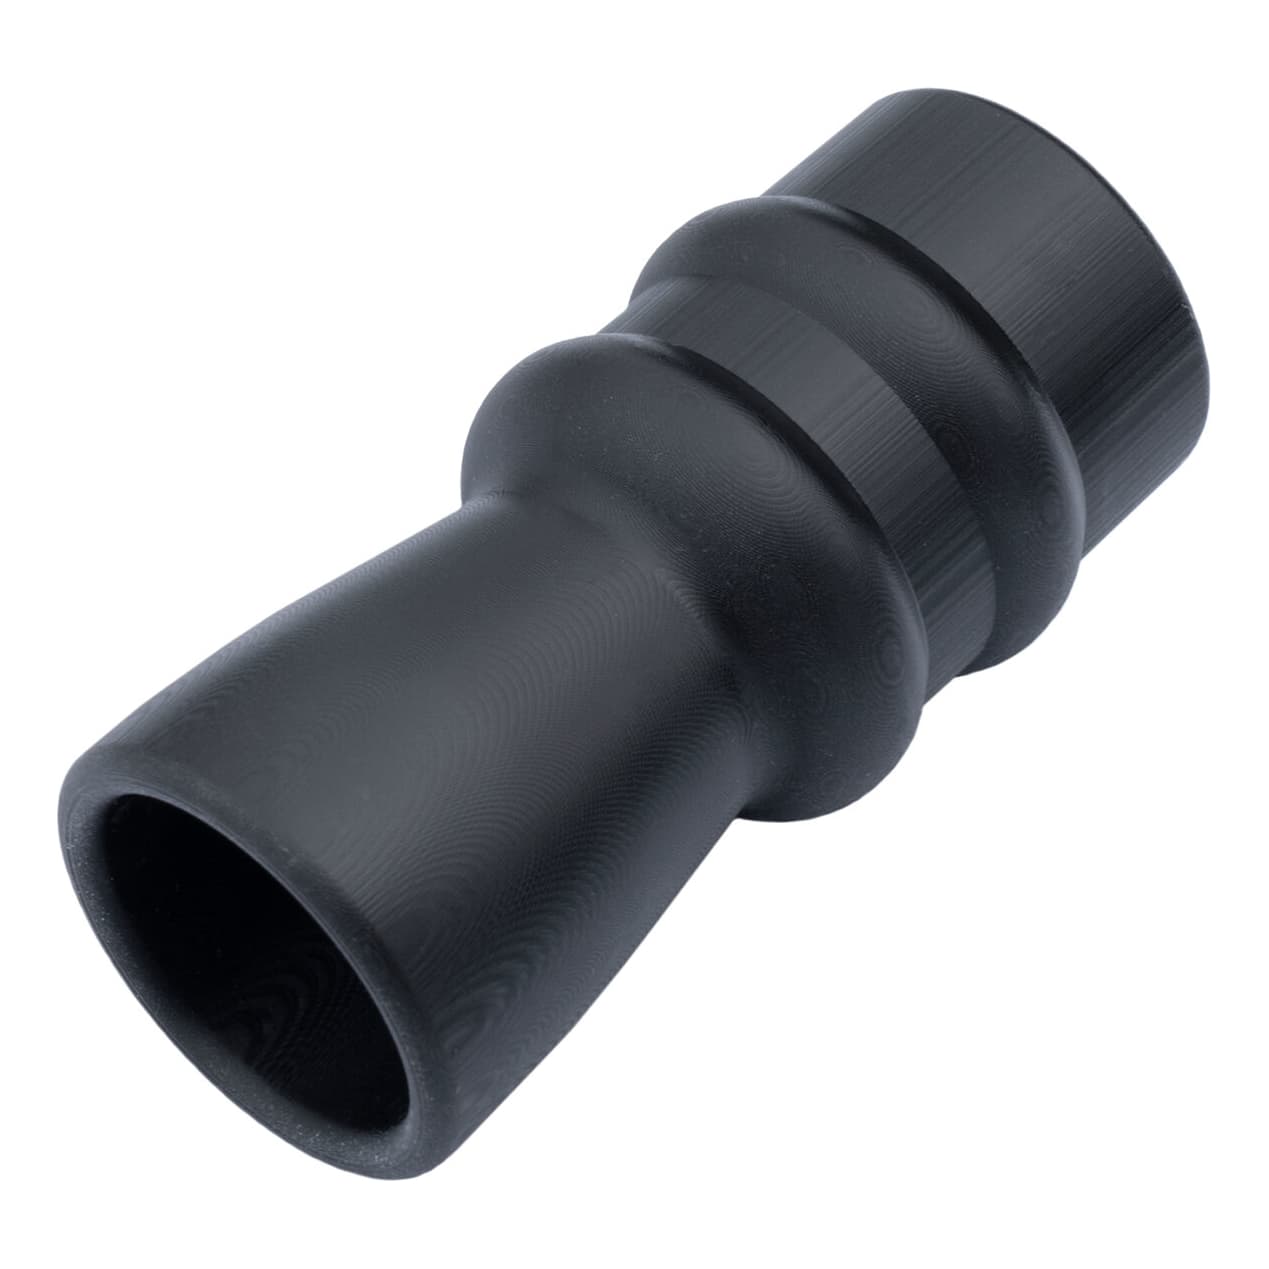 Phelps Elk Flared Mouthpiece